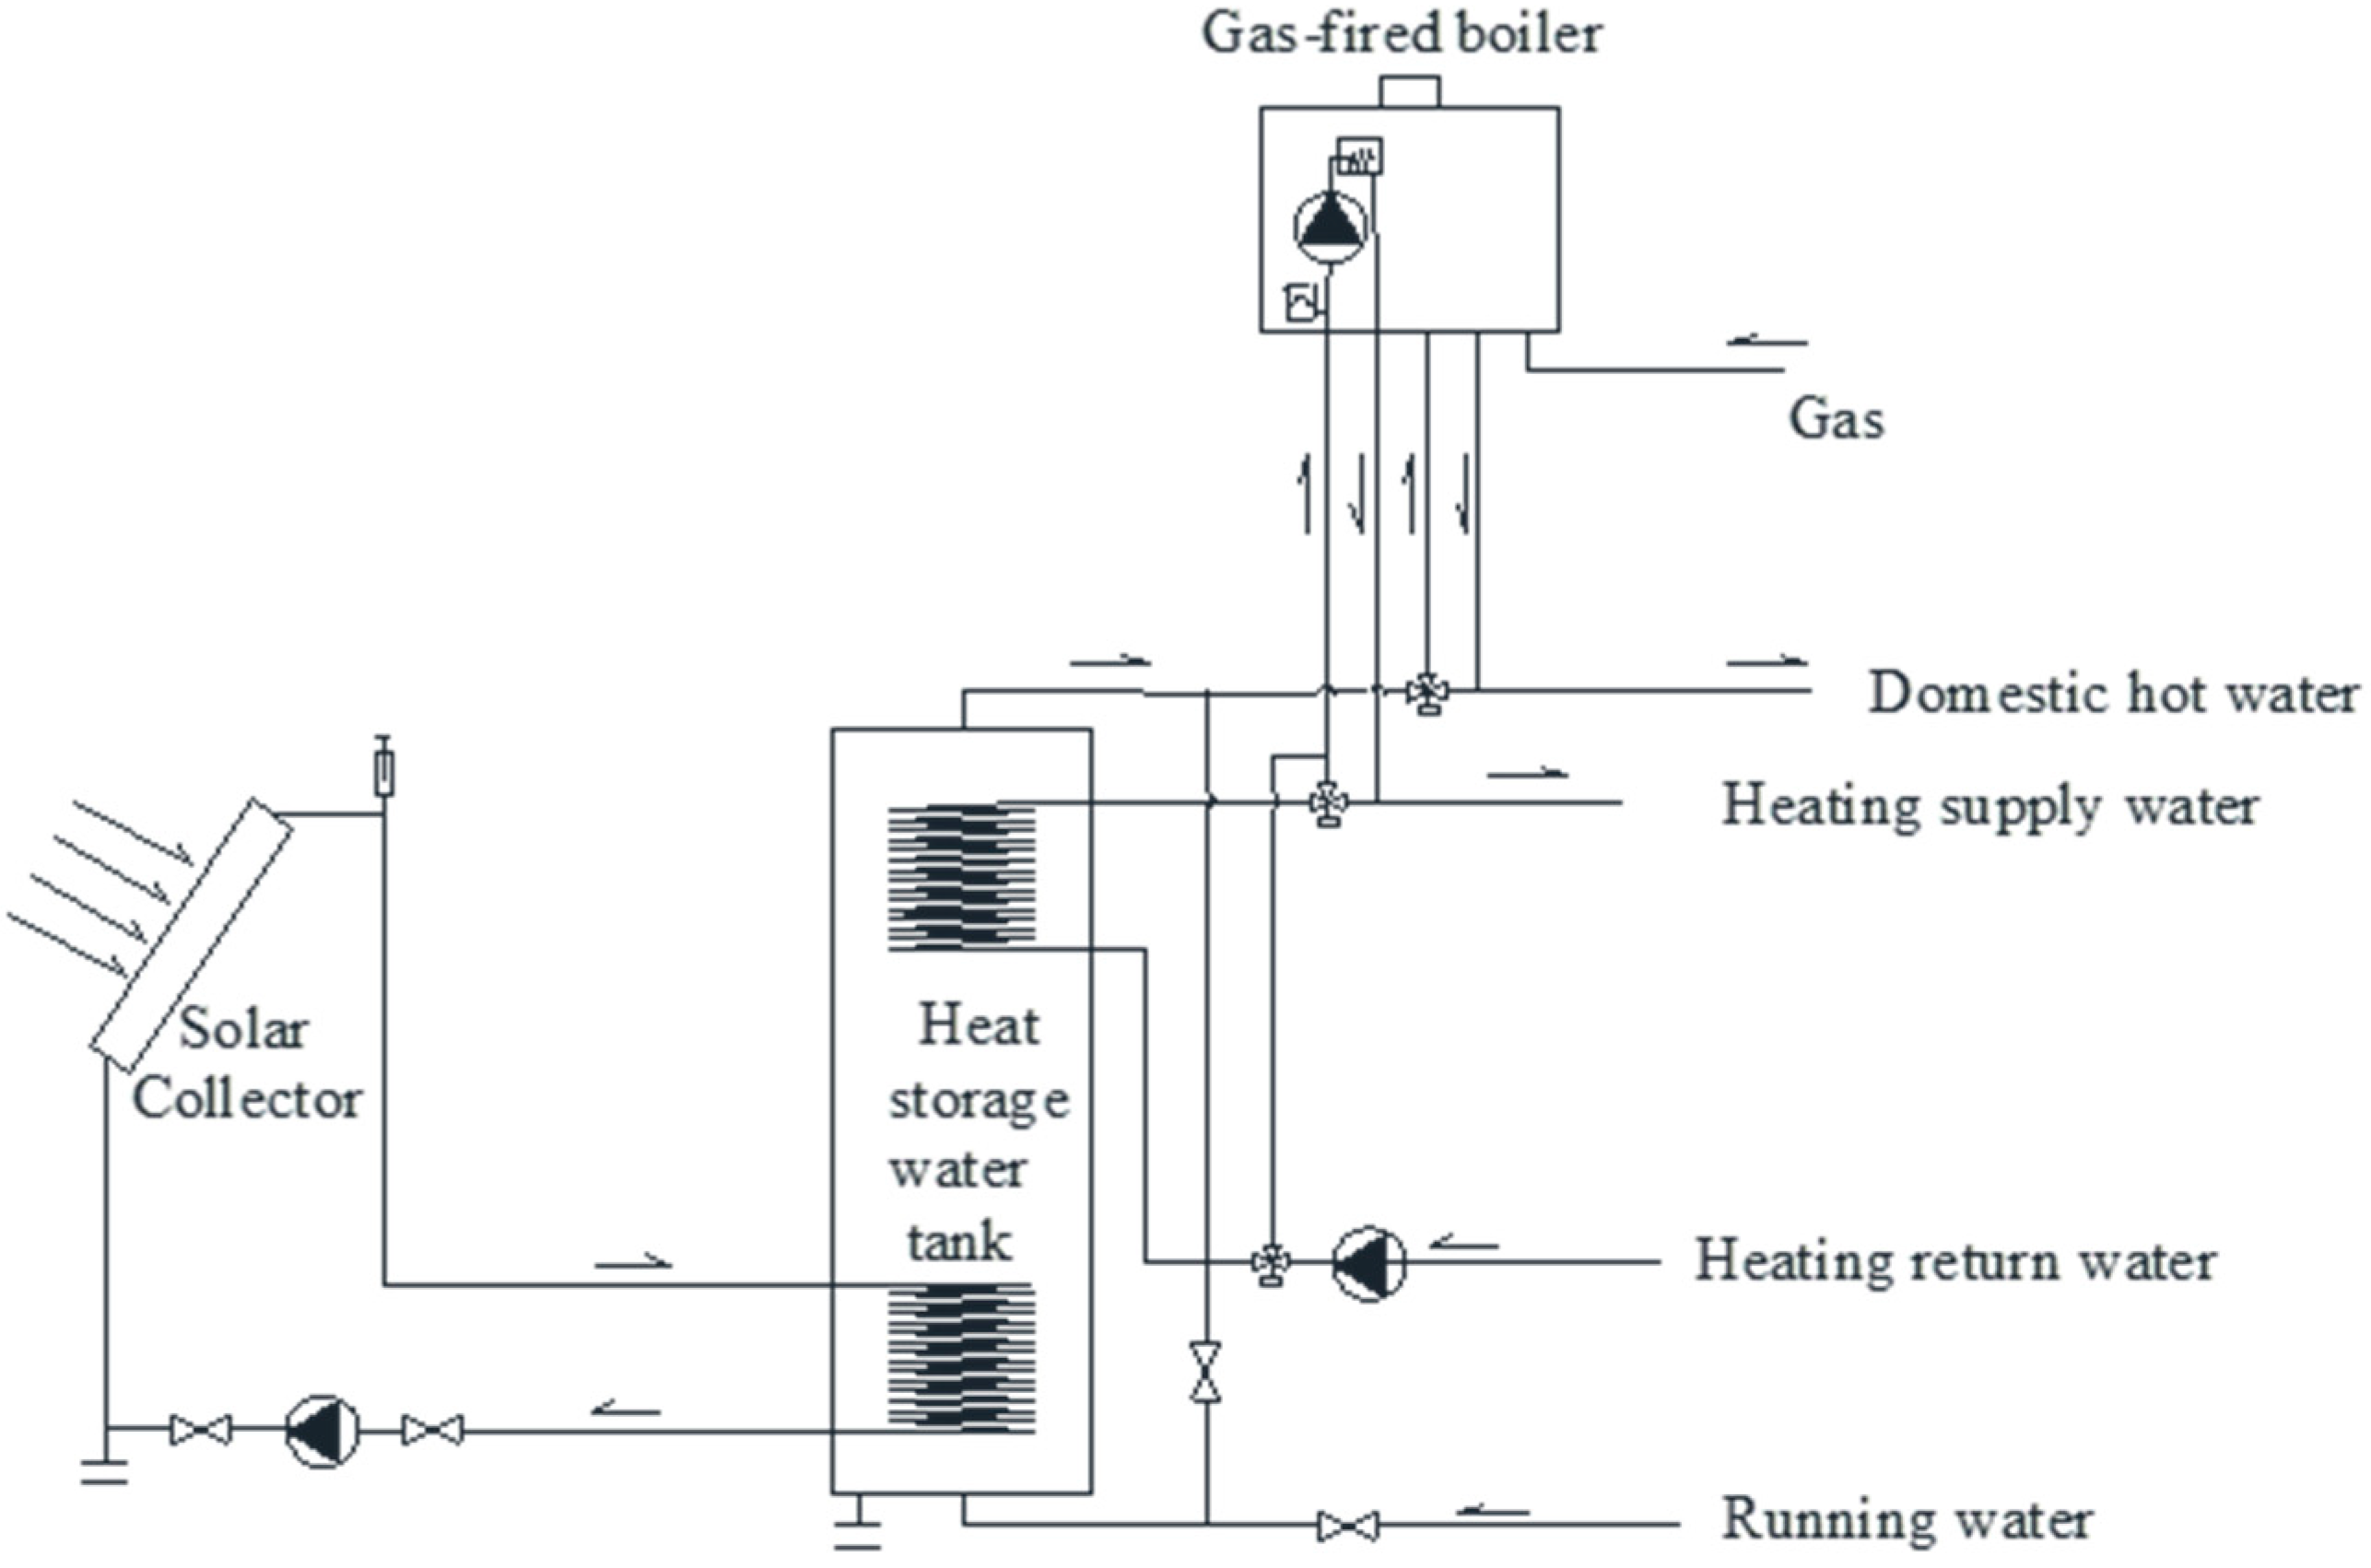 Energies | Free Full-Text | Research on the Optimization Design of Solar  Energy-Gas-Fired Boiler Systems for Decentralized Heating